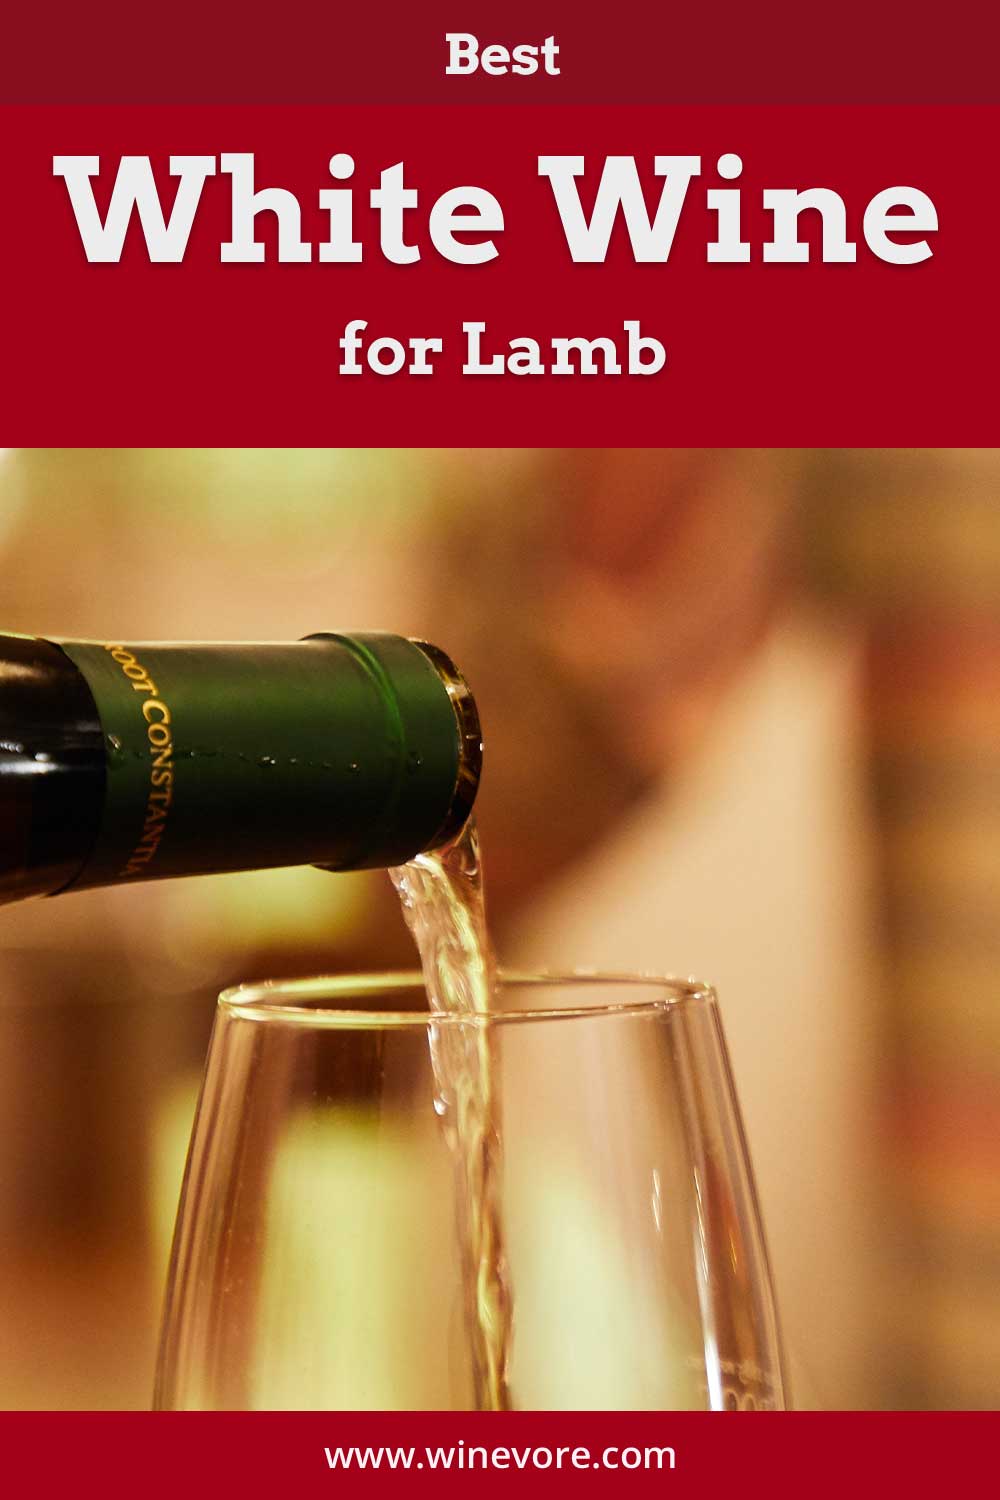 Pouring wine into a glass - Best White Wine for Lamb.